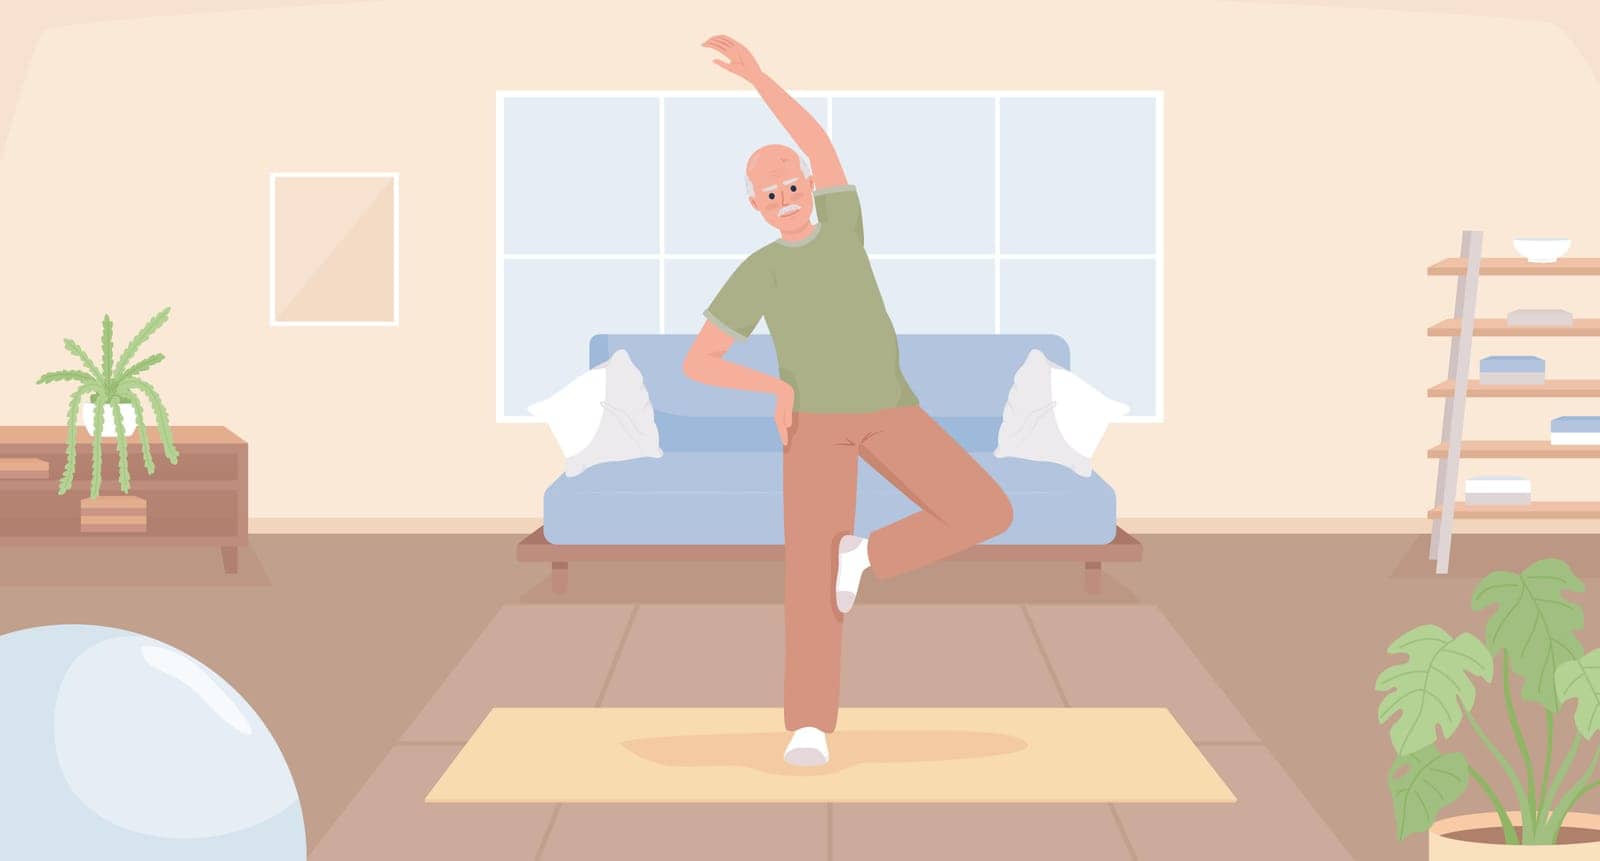 Morning stretches for elderly flat color vector illustration. Senior man warming up before yoga activity on mat. Fully editable 2D simple cartoon character with cozy living room interior on background